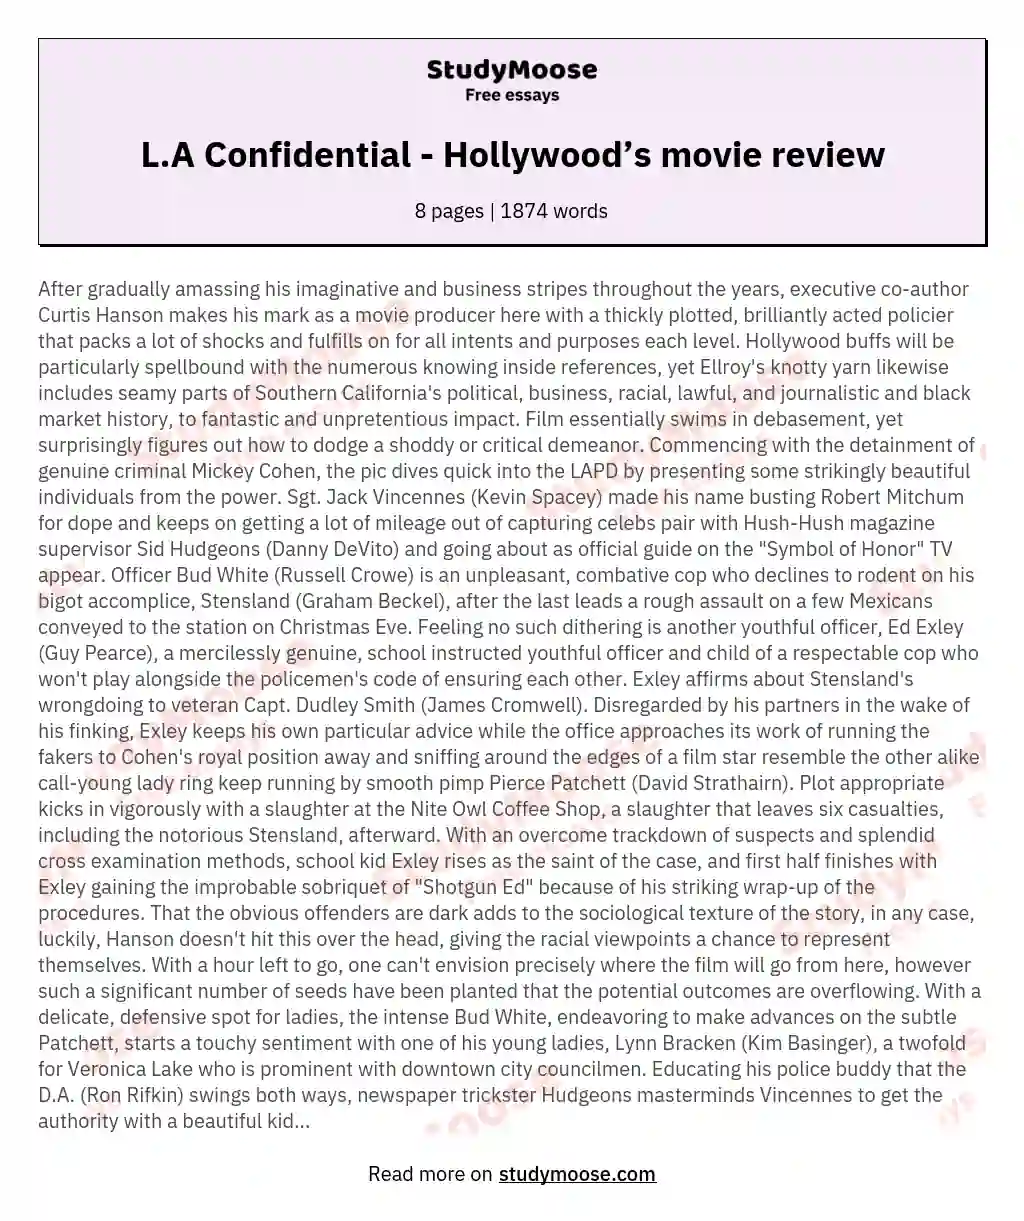 L.A Confidential - Hollywood’s movie review essay